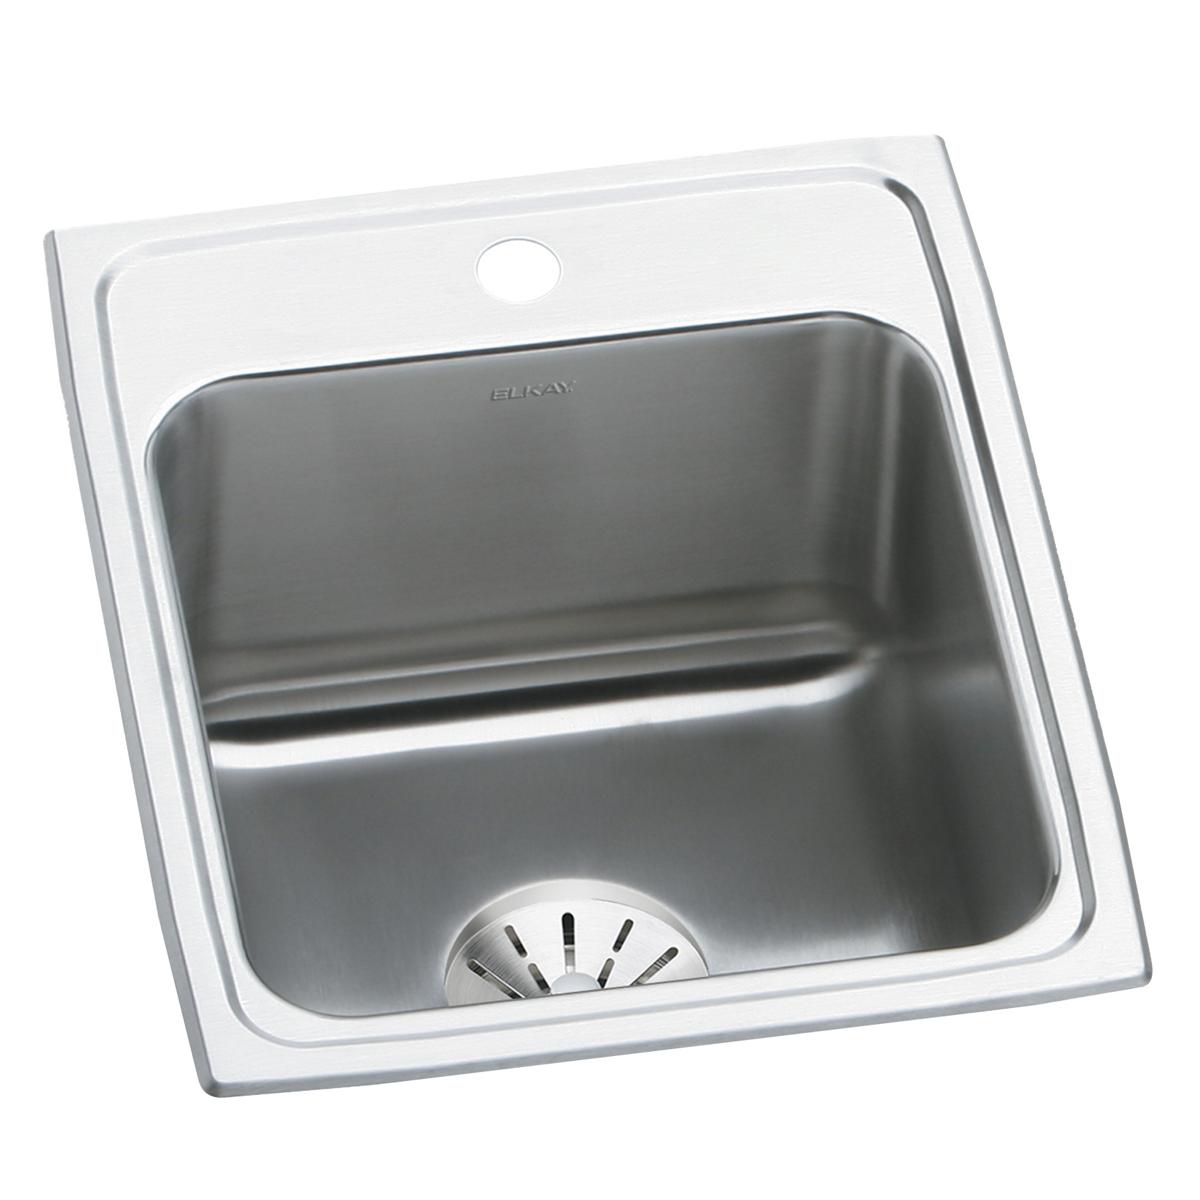 Elkay Lustertone Classic 17" x 22" x 10-1/8" Single Bowl Drop-in Sink with Perfect Drain